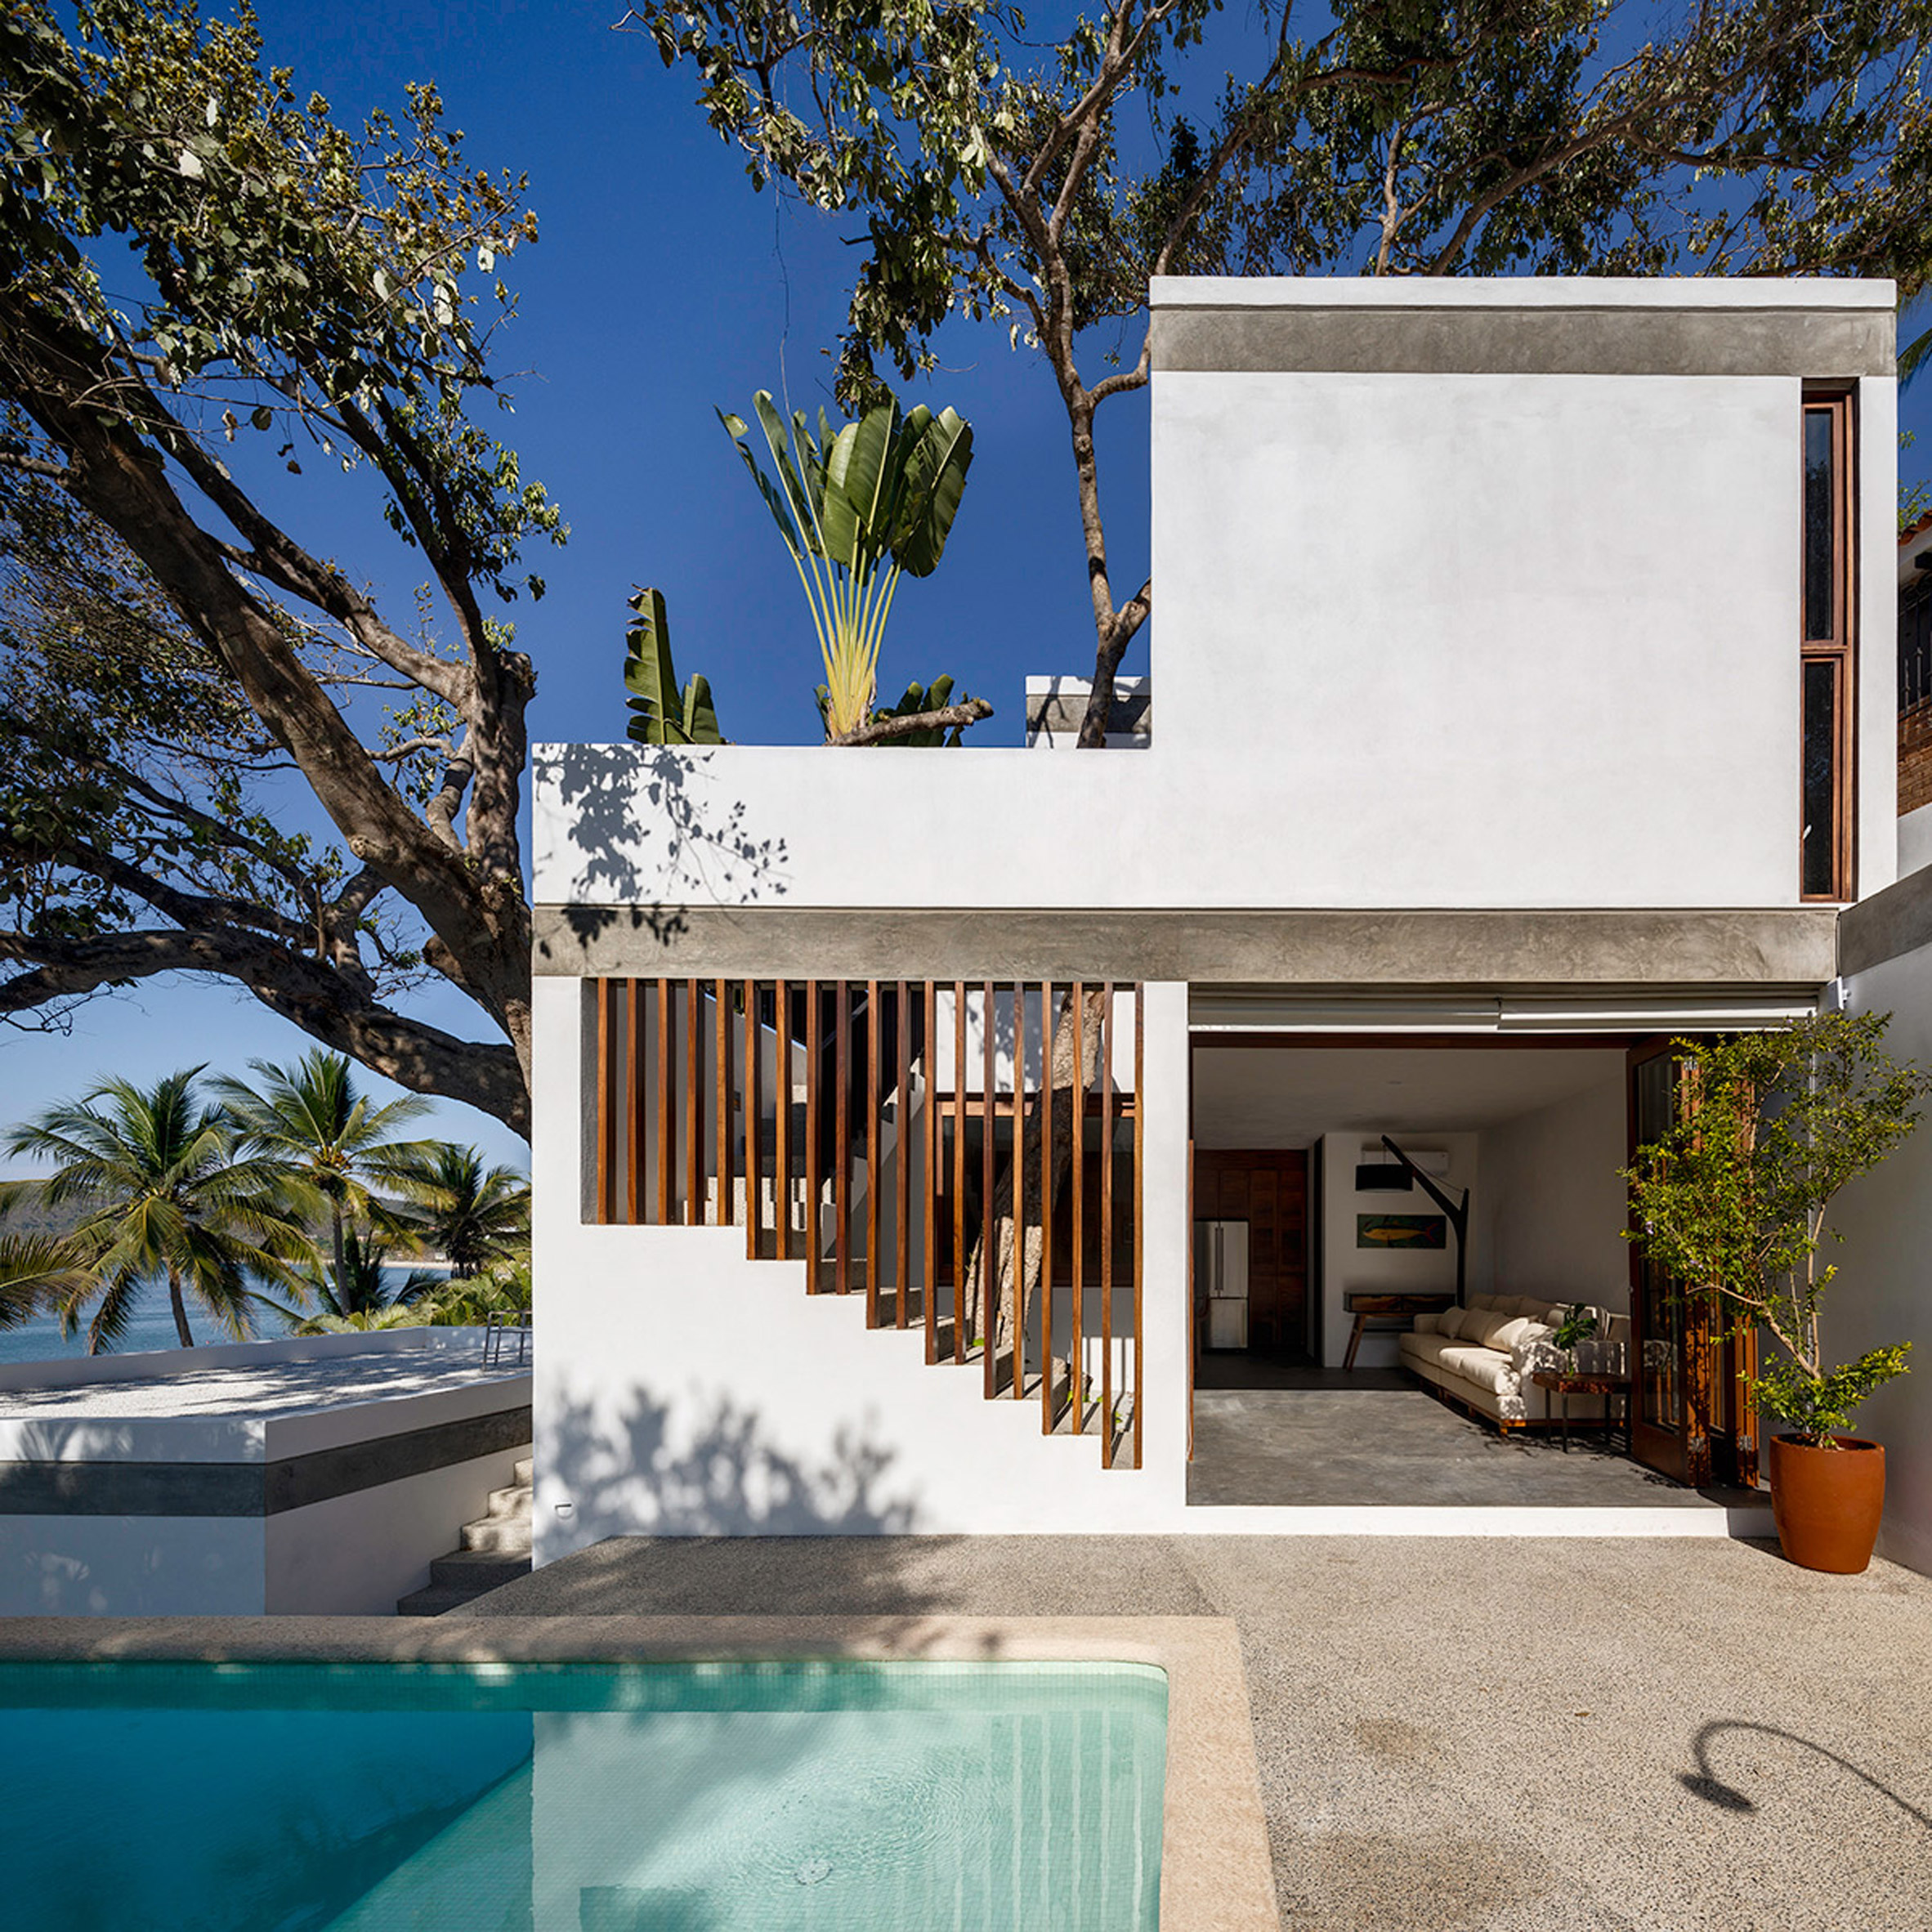 Main Office staggers Casa LT down lush slope in Mexican surf village